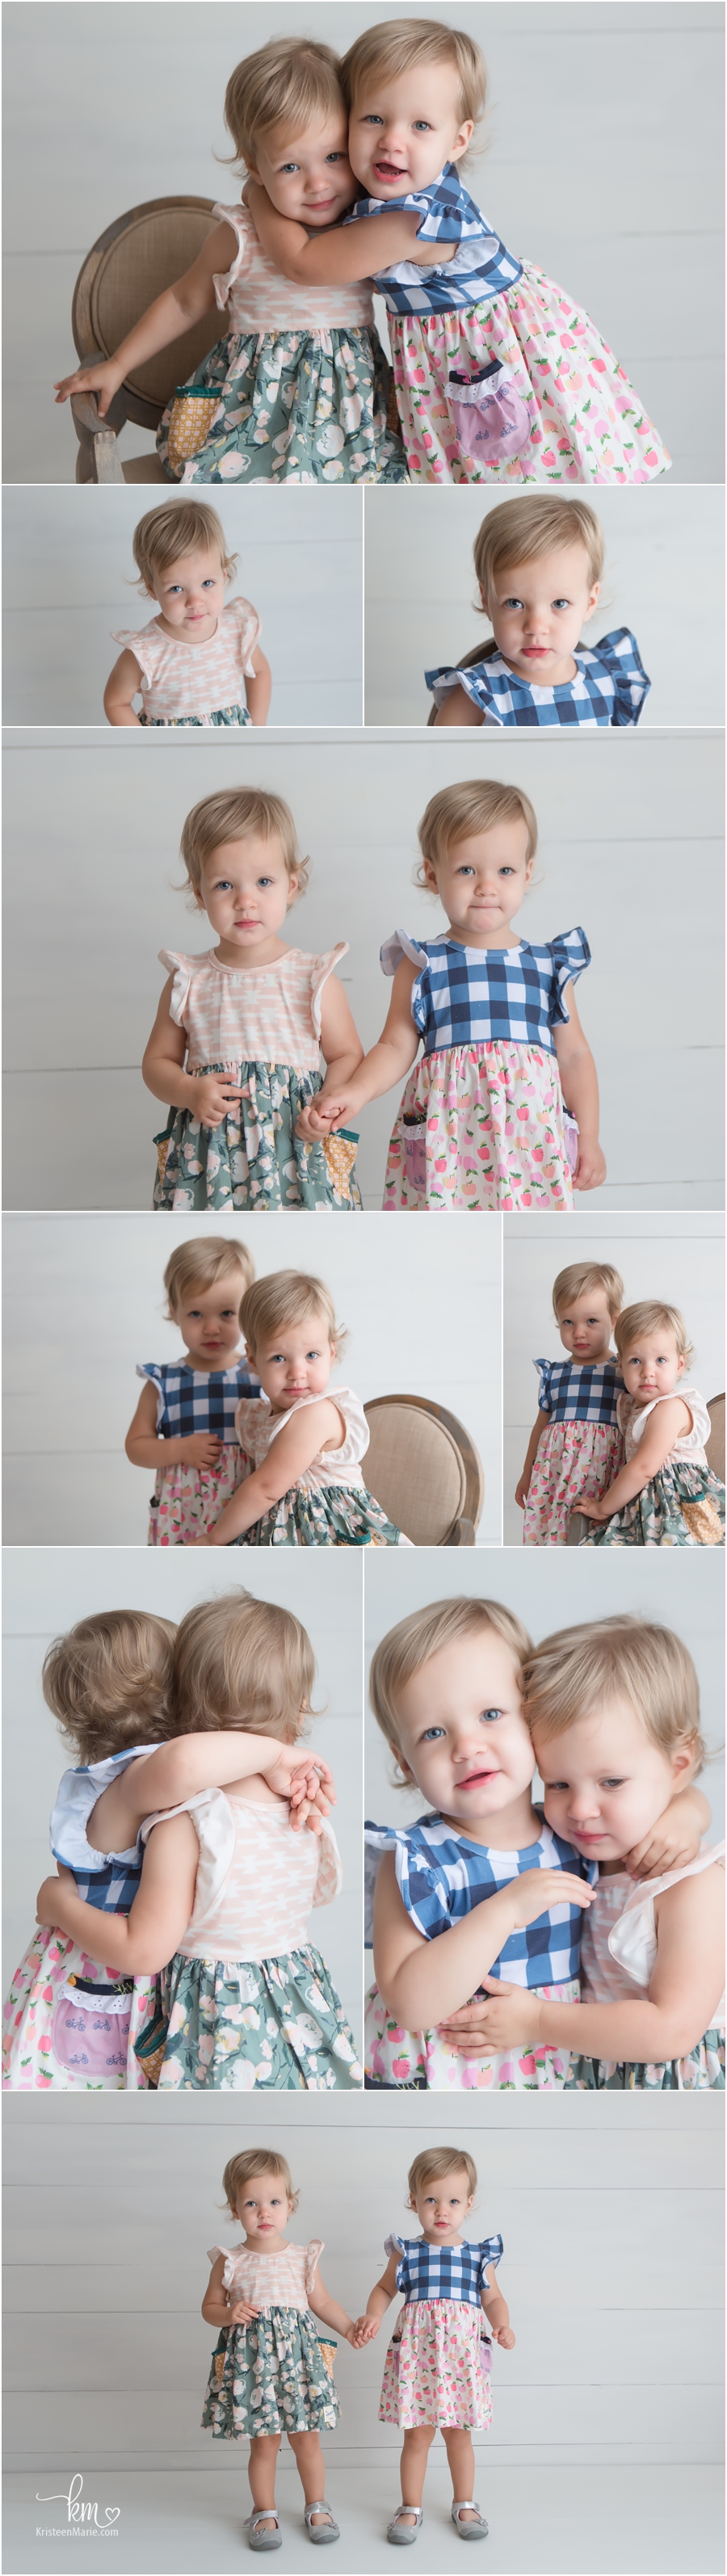 twin girls at 2 years old - milestone session in studio